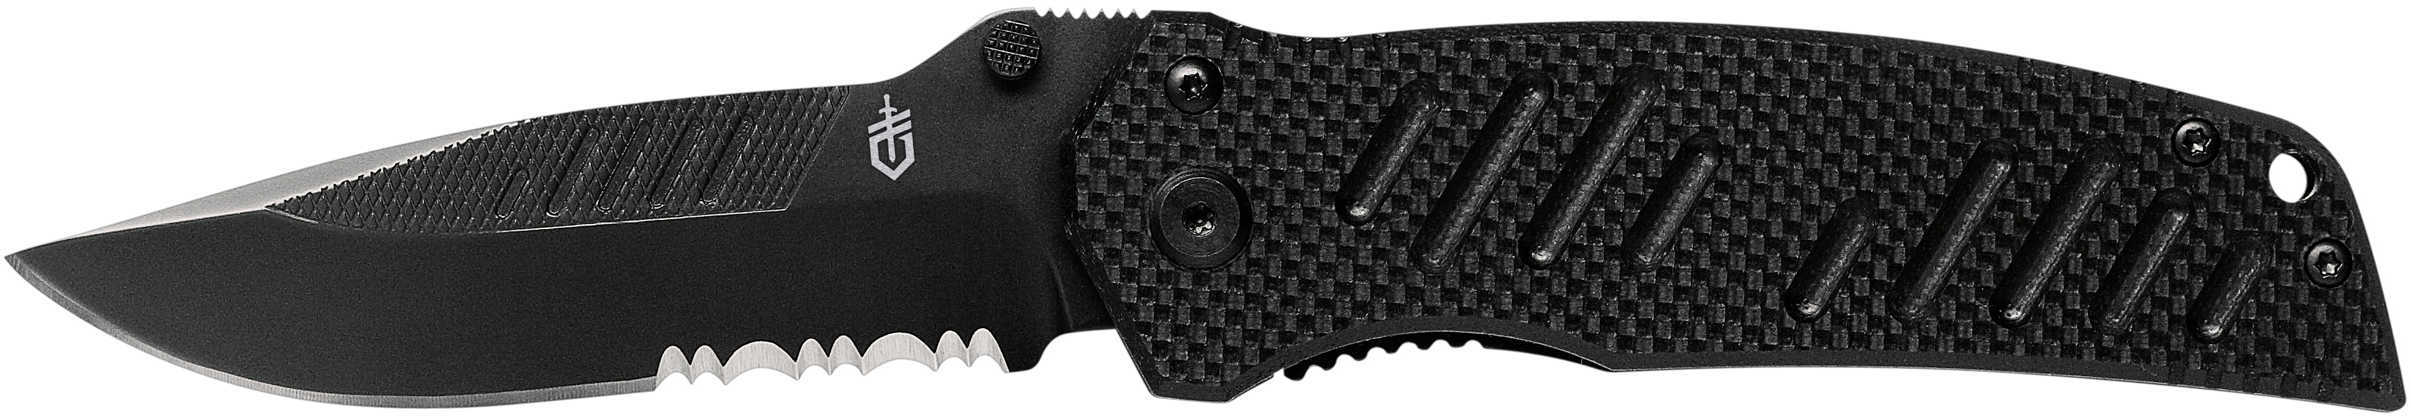 Gerber Blades Swagger, Drop Point Half-Serrated/Clam 31-000594